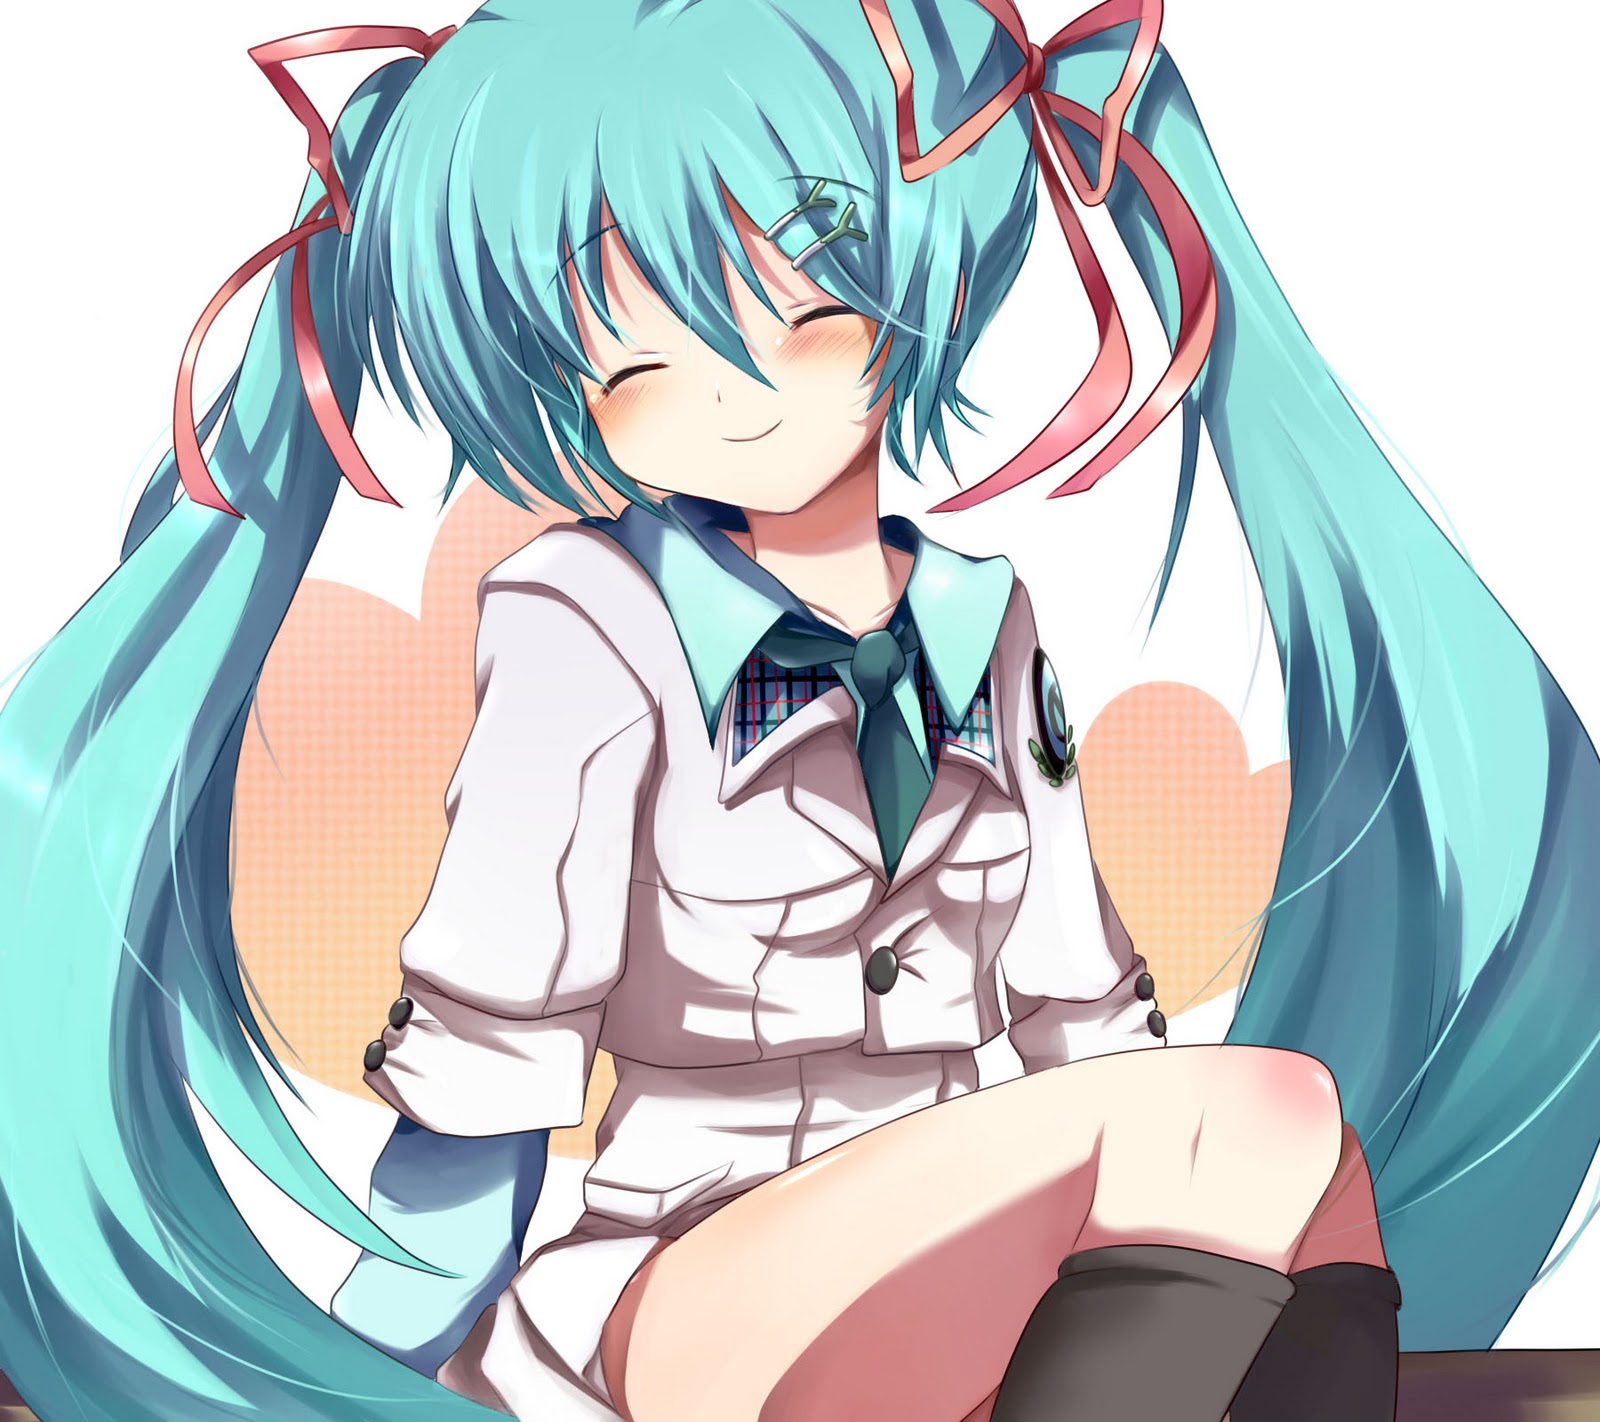 I think Miku is in love